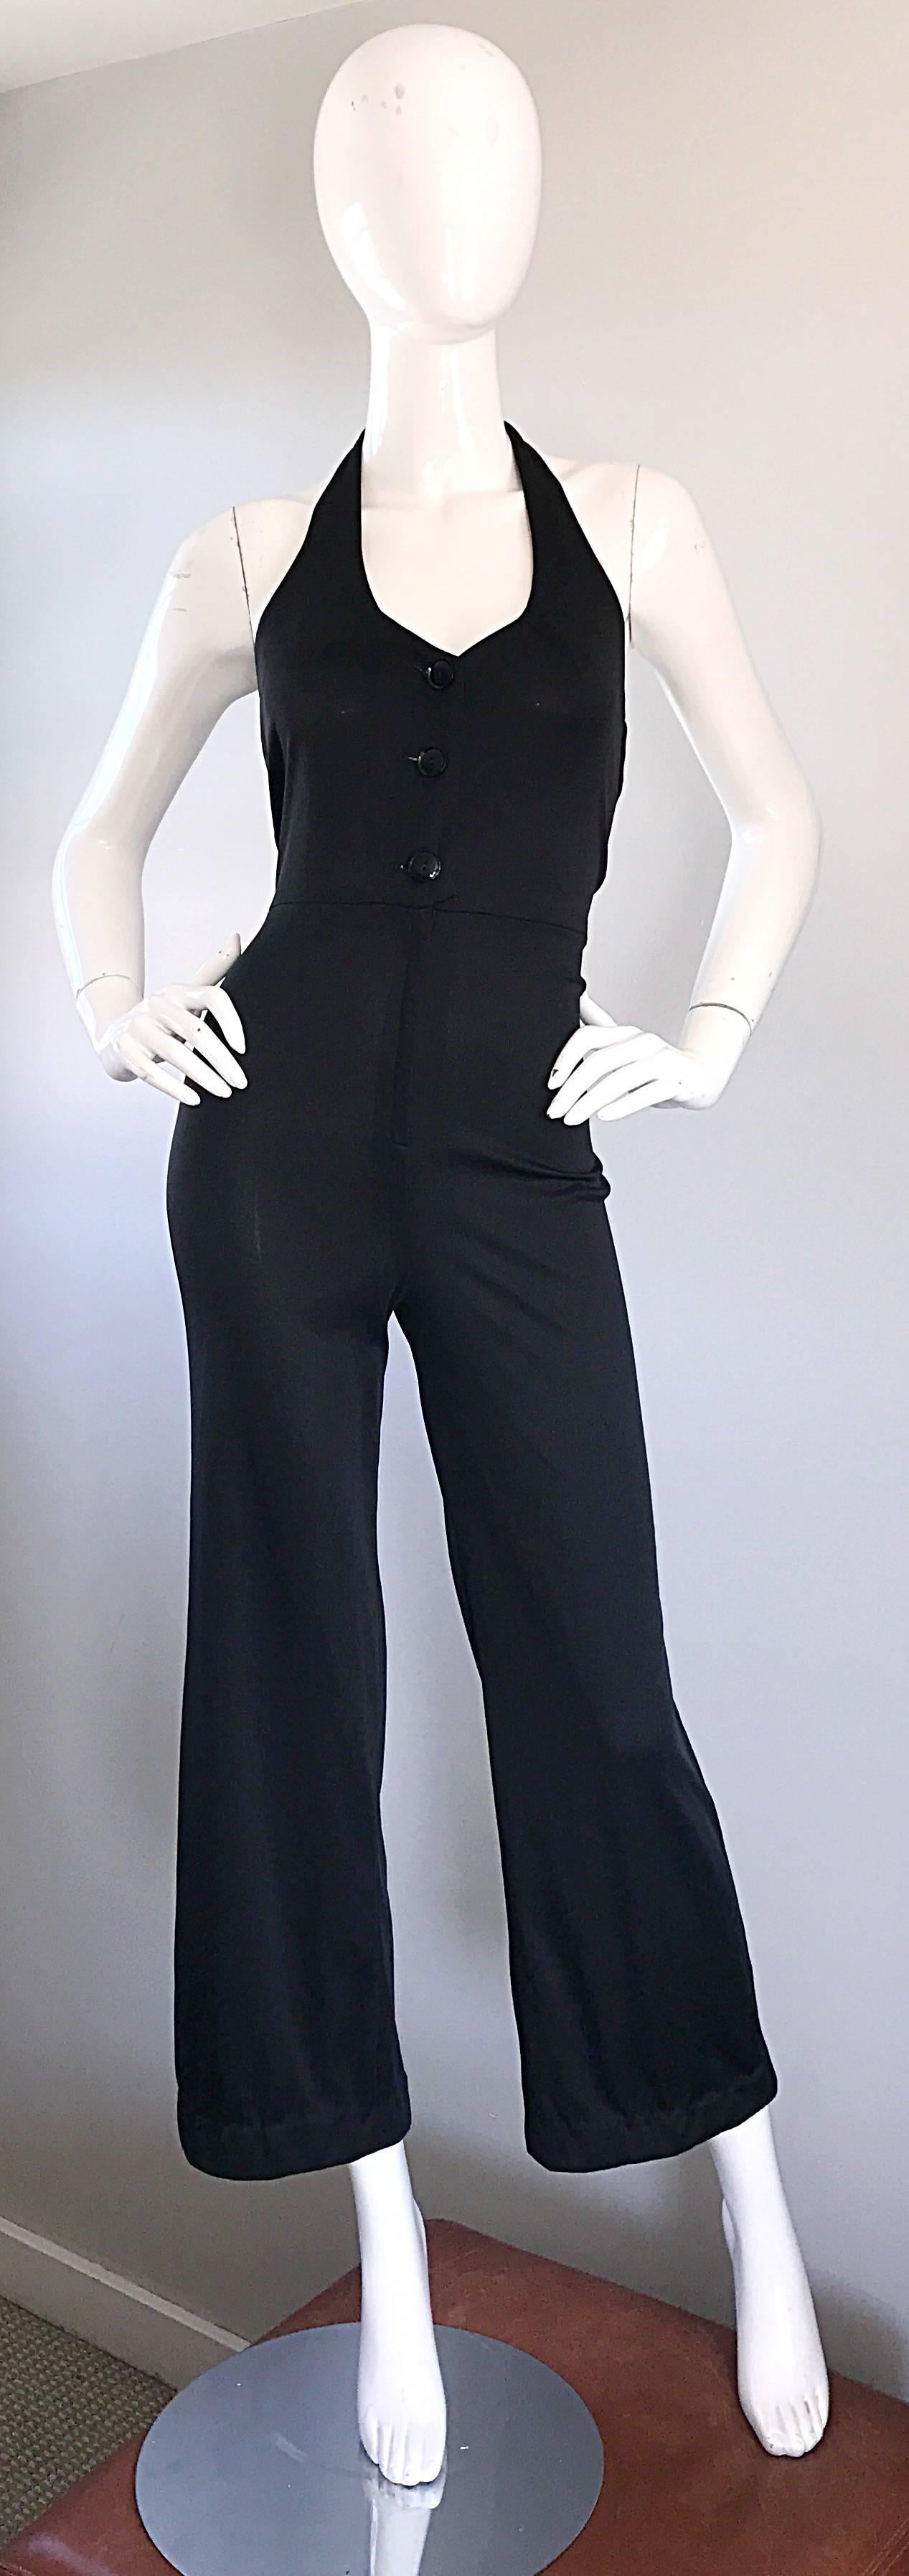 Sexy vintage 70s black jersey halter jumpsuit! Features a tailored bodice that buttons up the front. Hidden zipper at waistband. Nice flare legged / bell bottom. Buttons at back center halterneck. Looks amazing on, and hugs the body in all the right